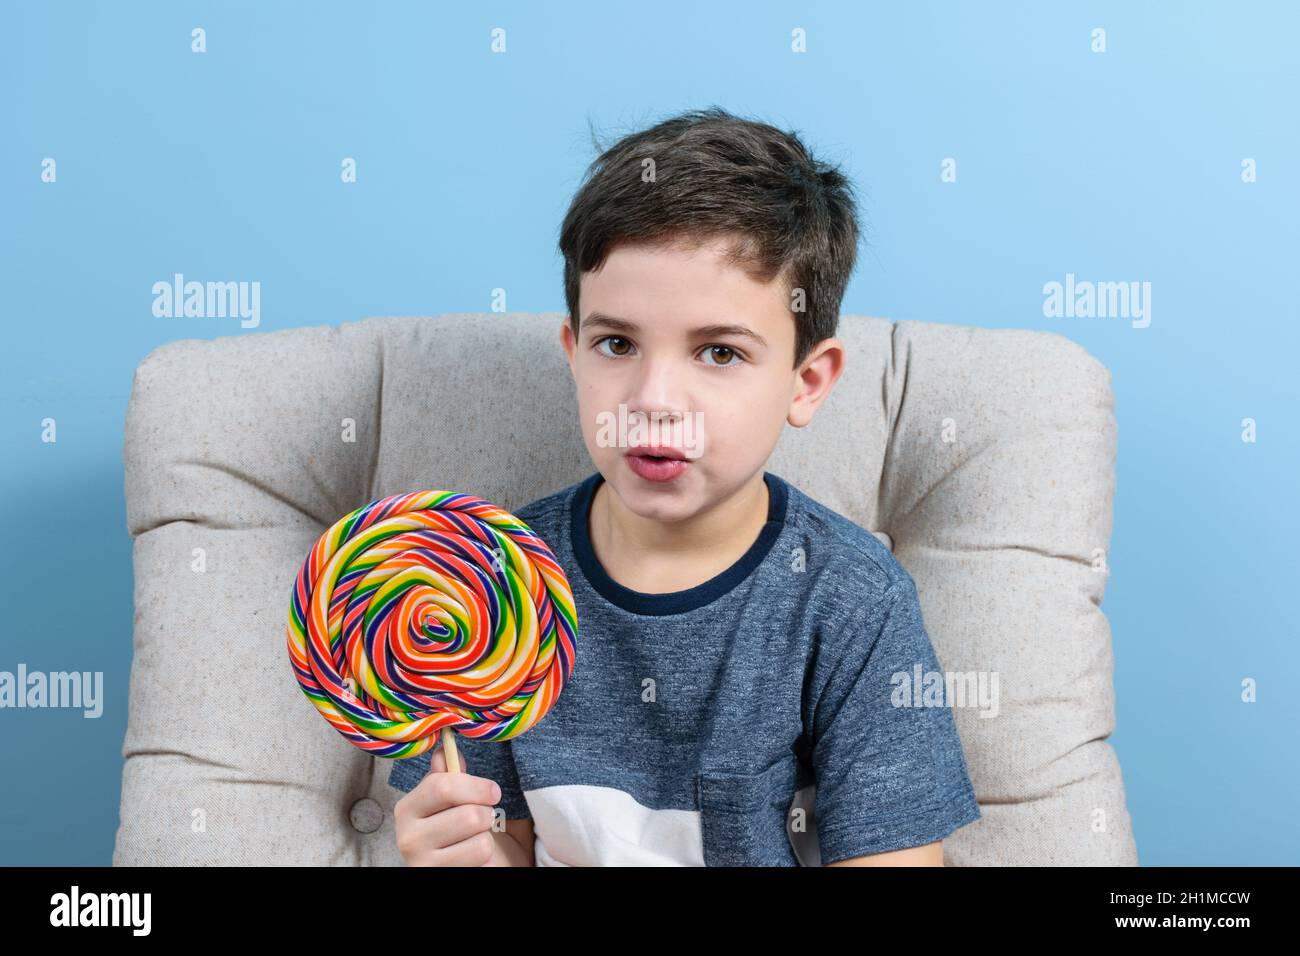 8 years old child looking at the camera with his mouth open and holding a big colorful lollipop. Stock Photo